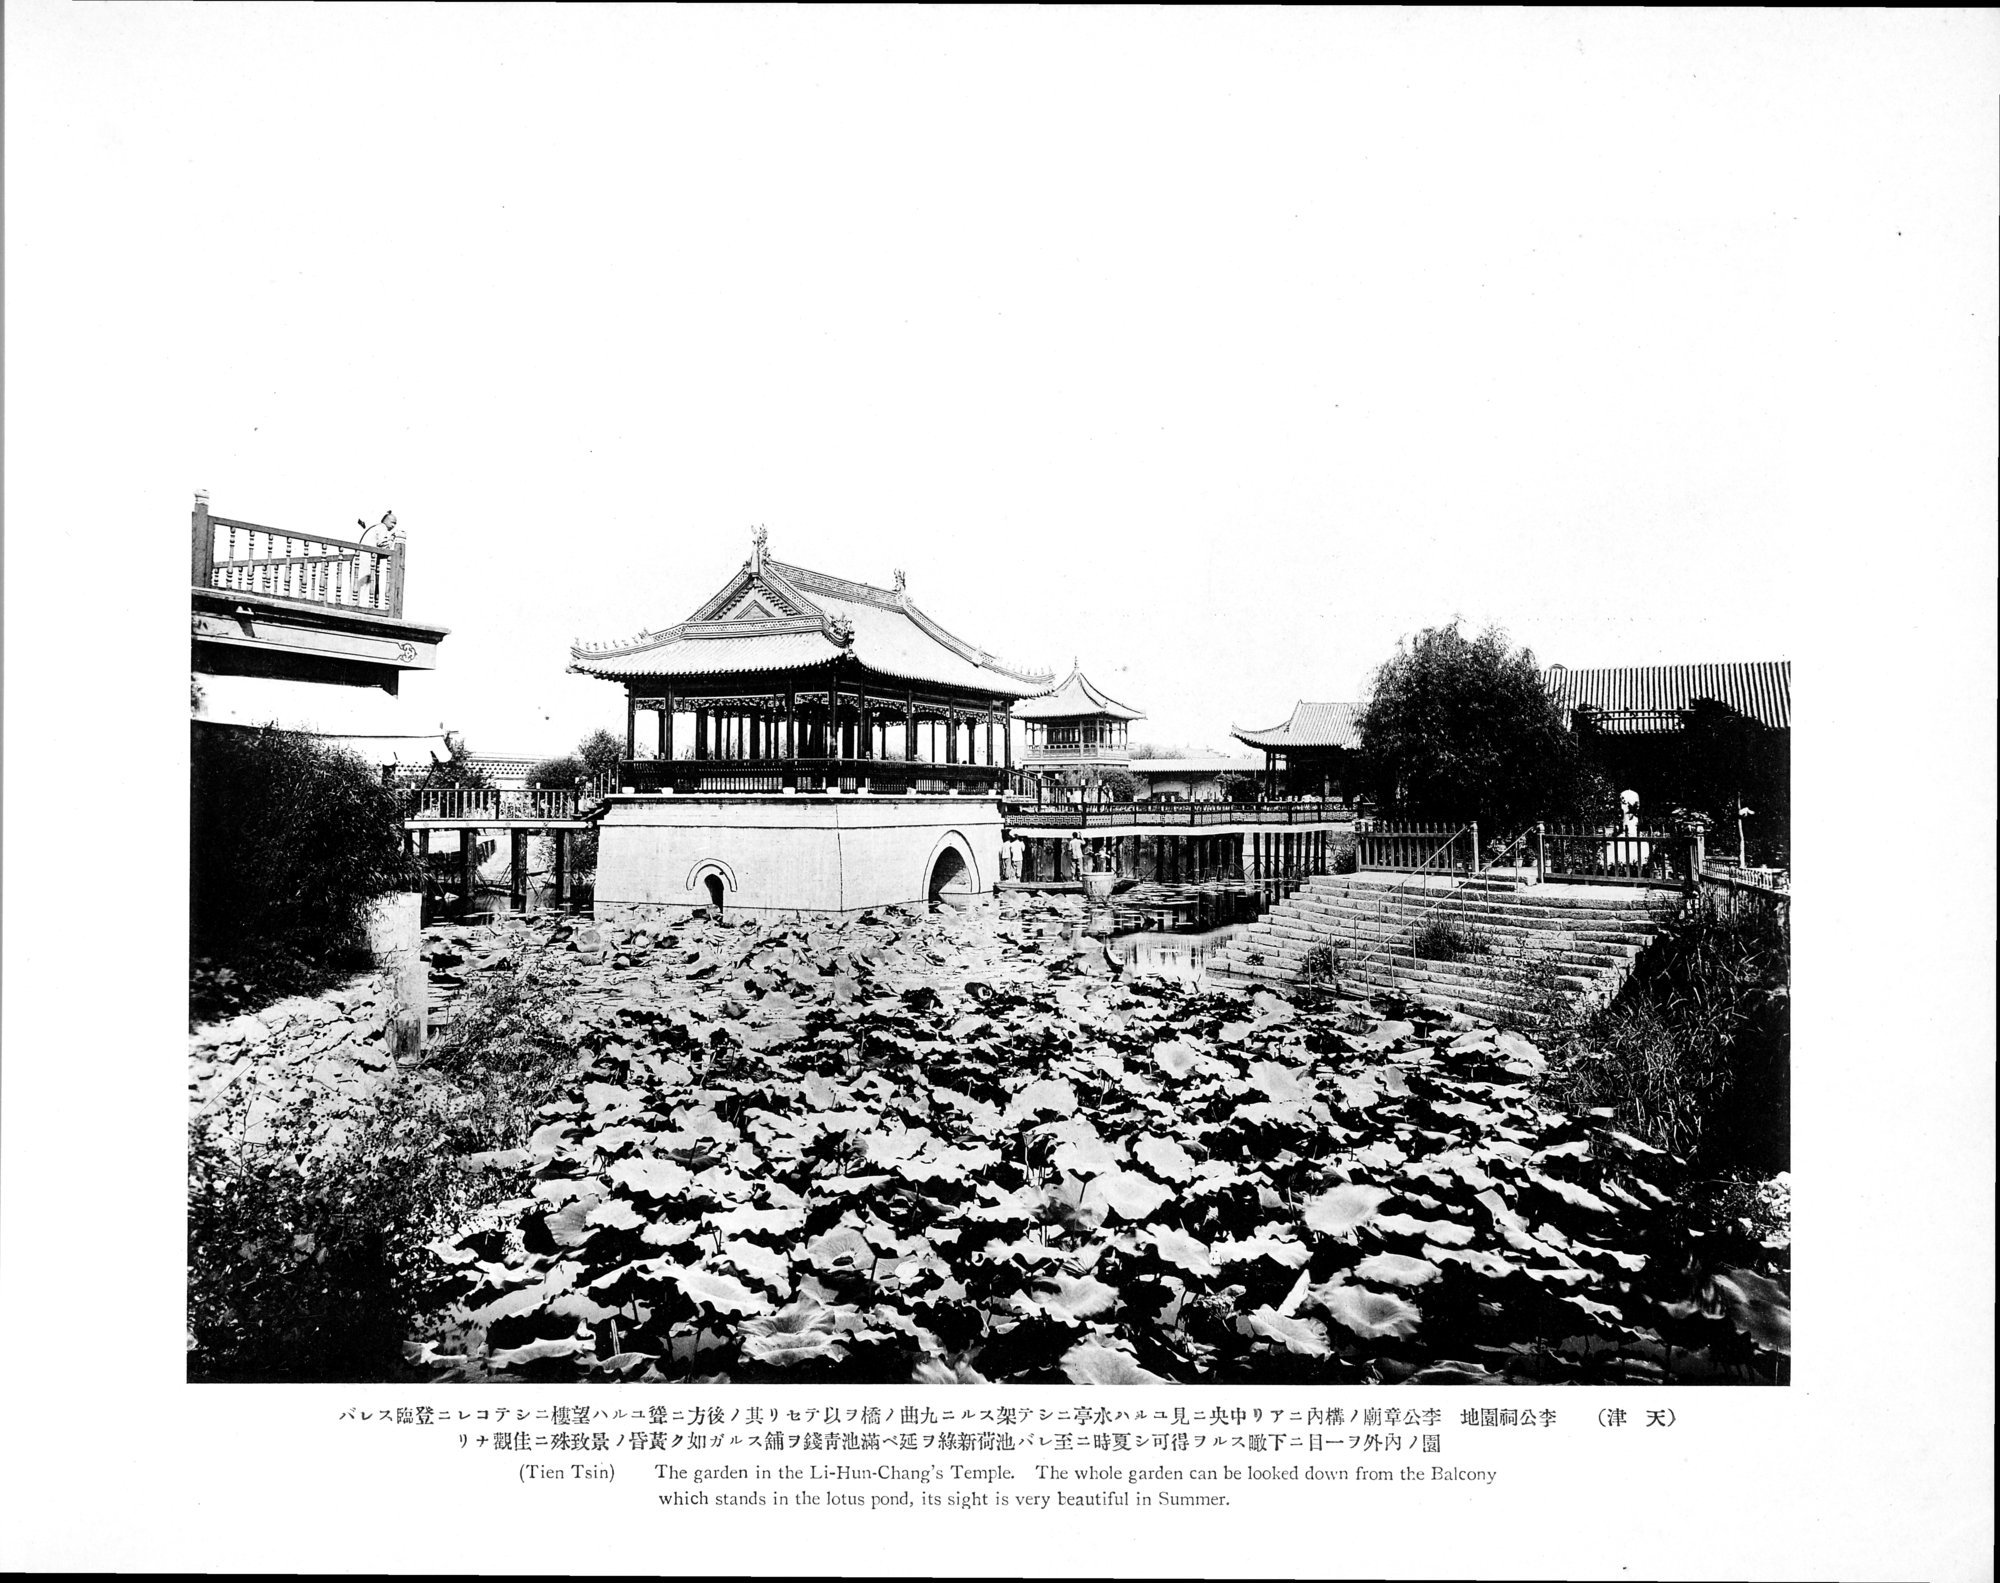 Views and Custom of North China : vol.1 / Page 61 (Grayscale High Resolution Image)